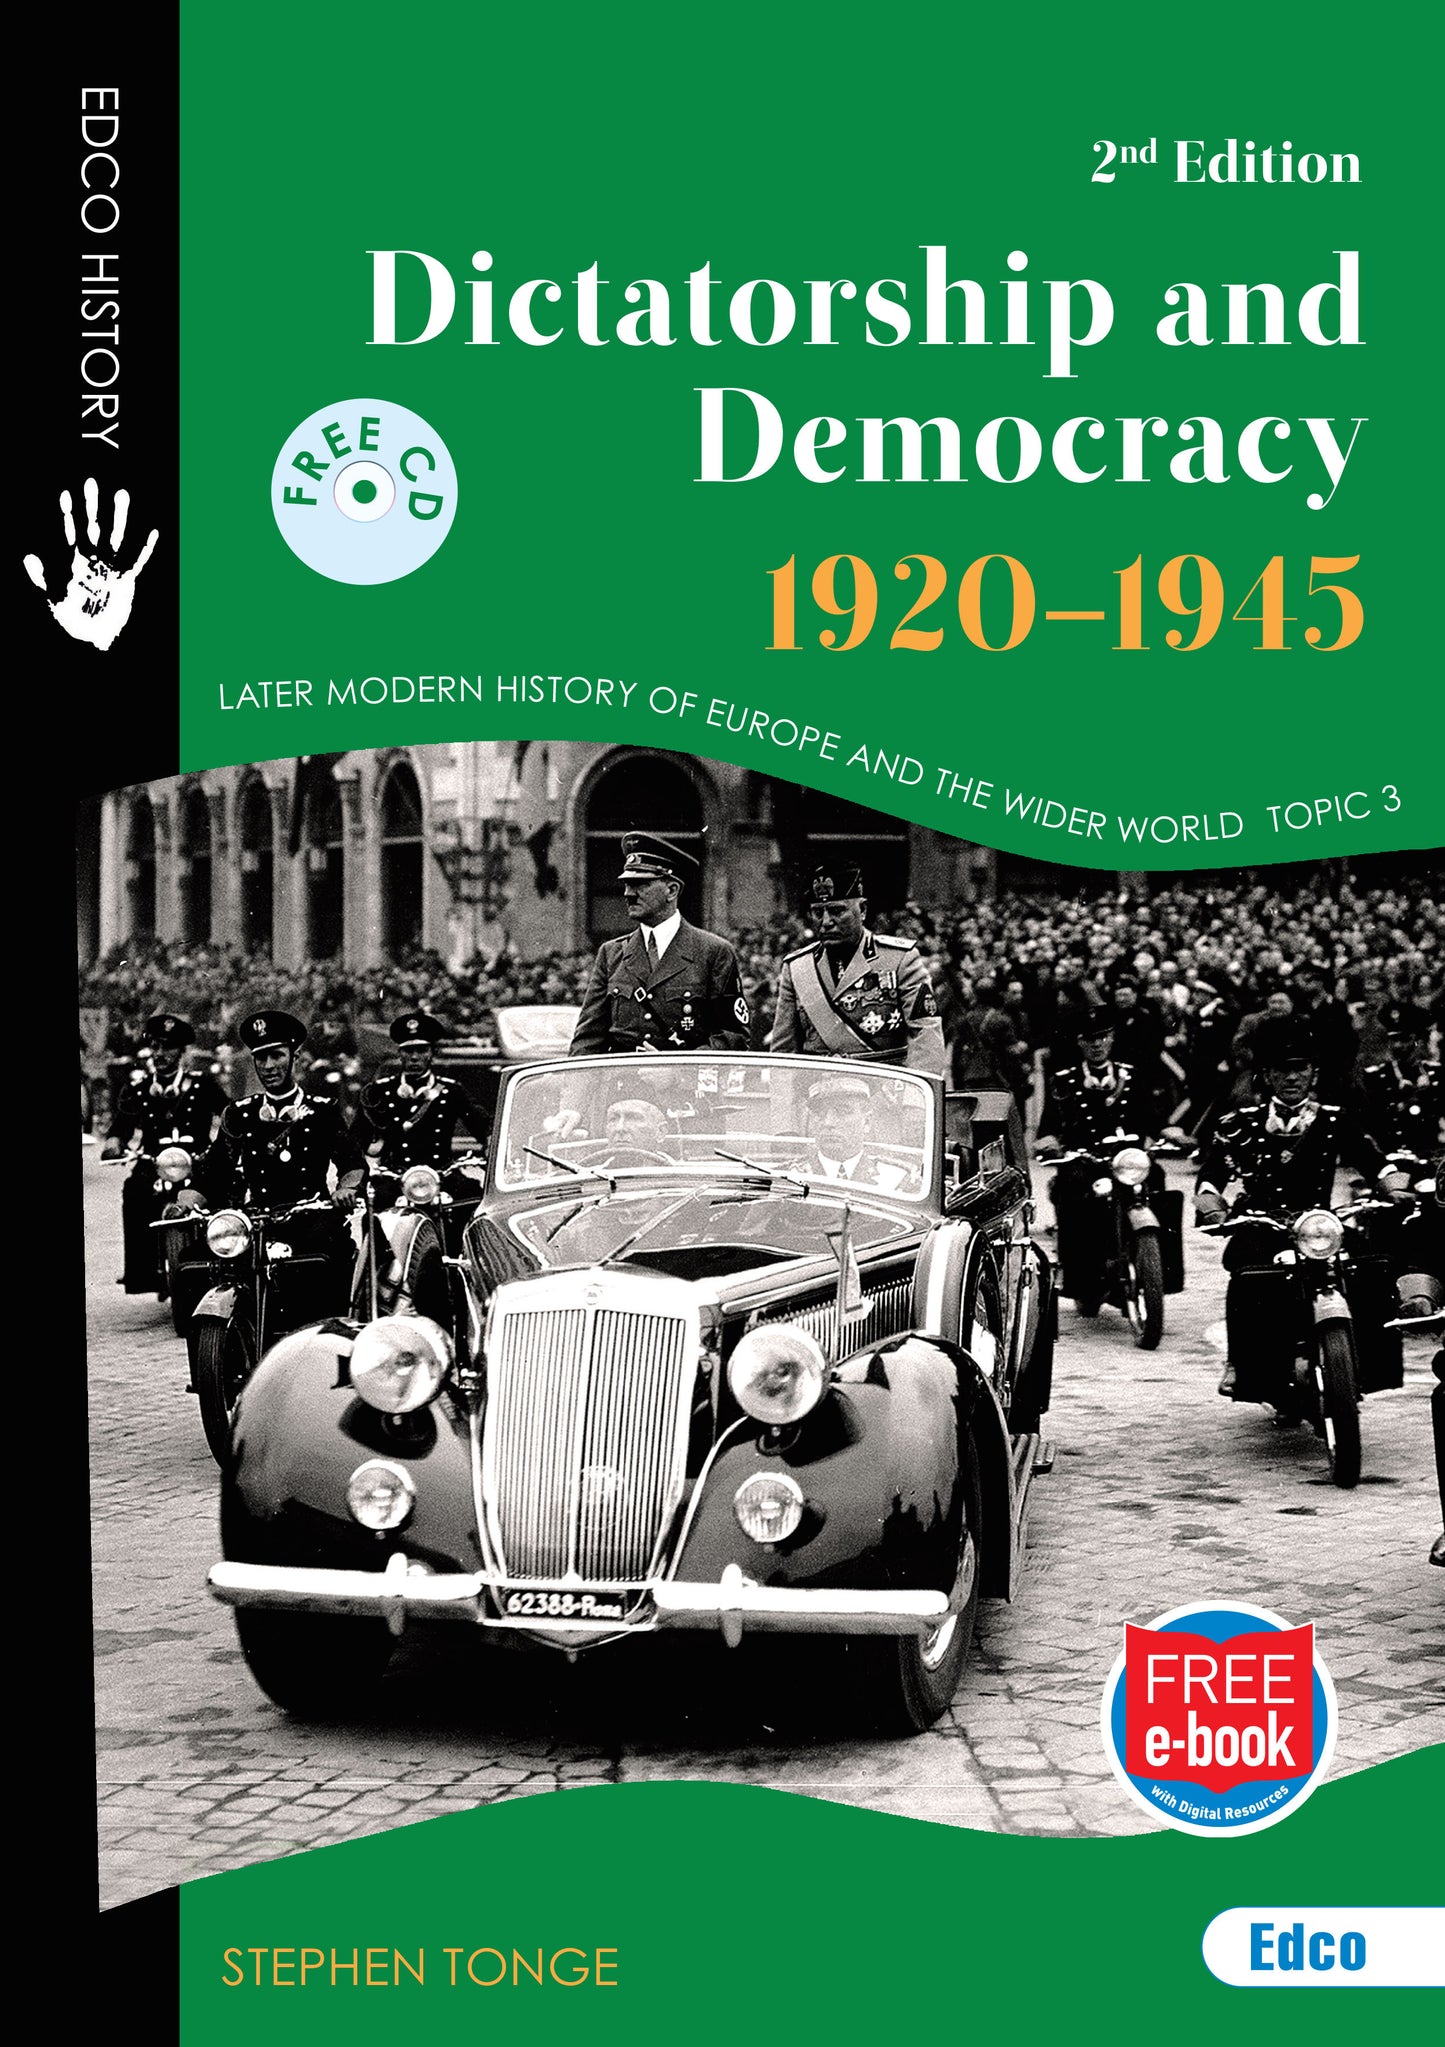 Dictatorship and Democracy 1920-1945 - 2nd Edition